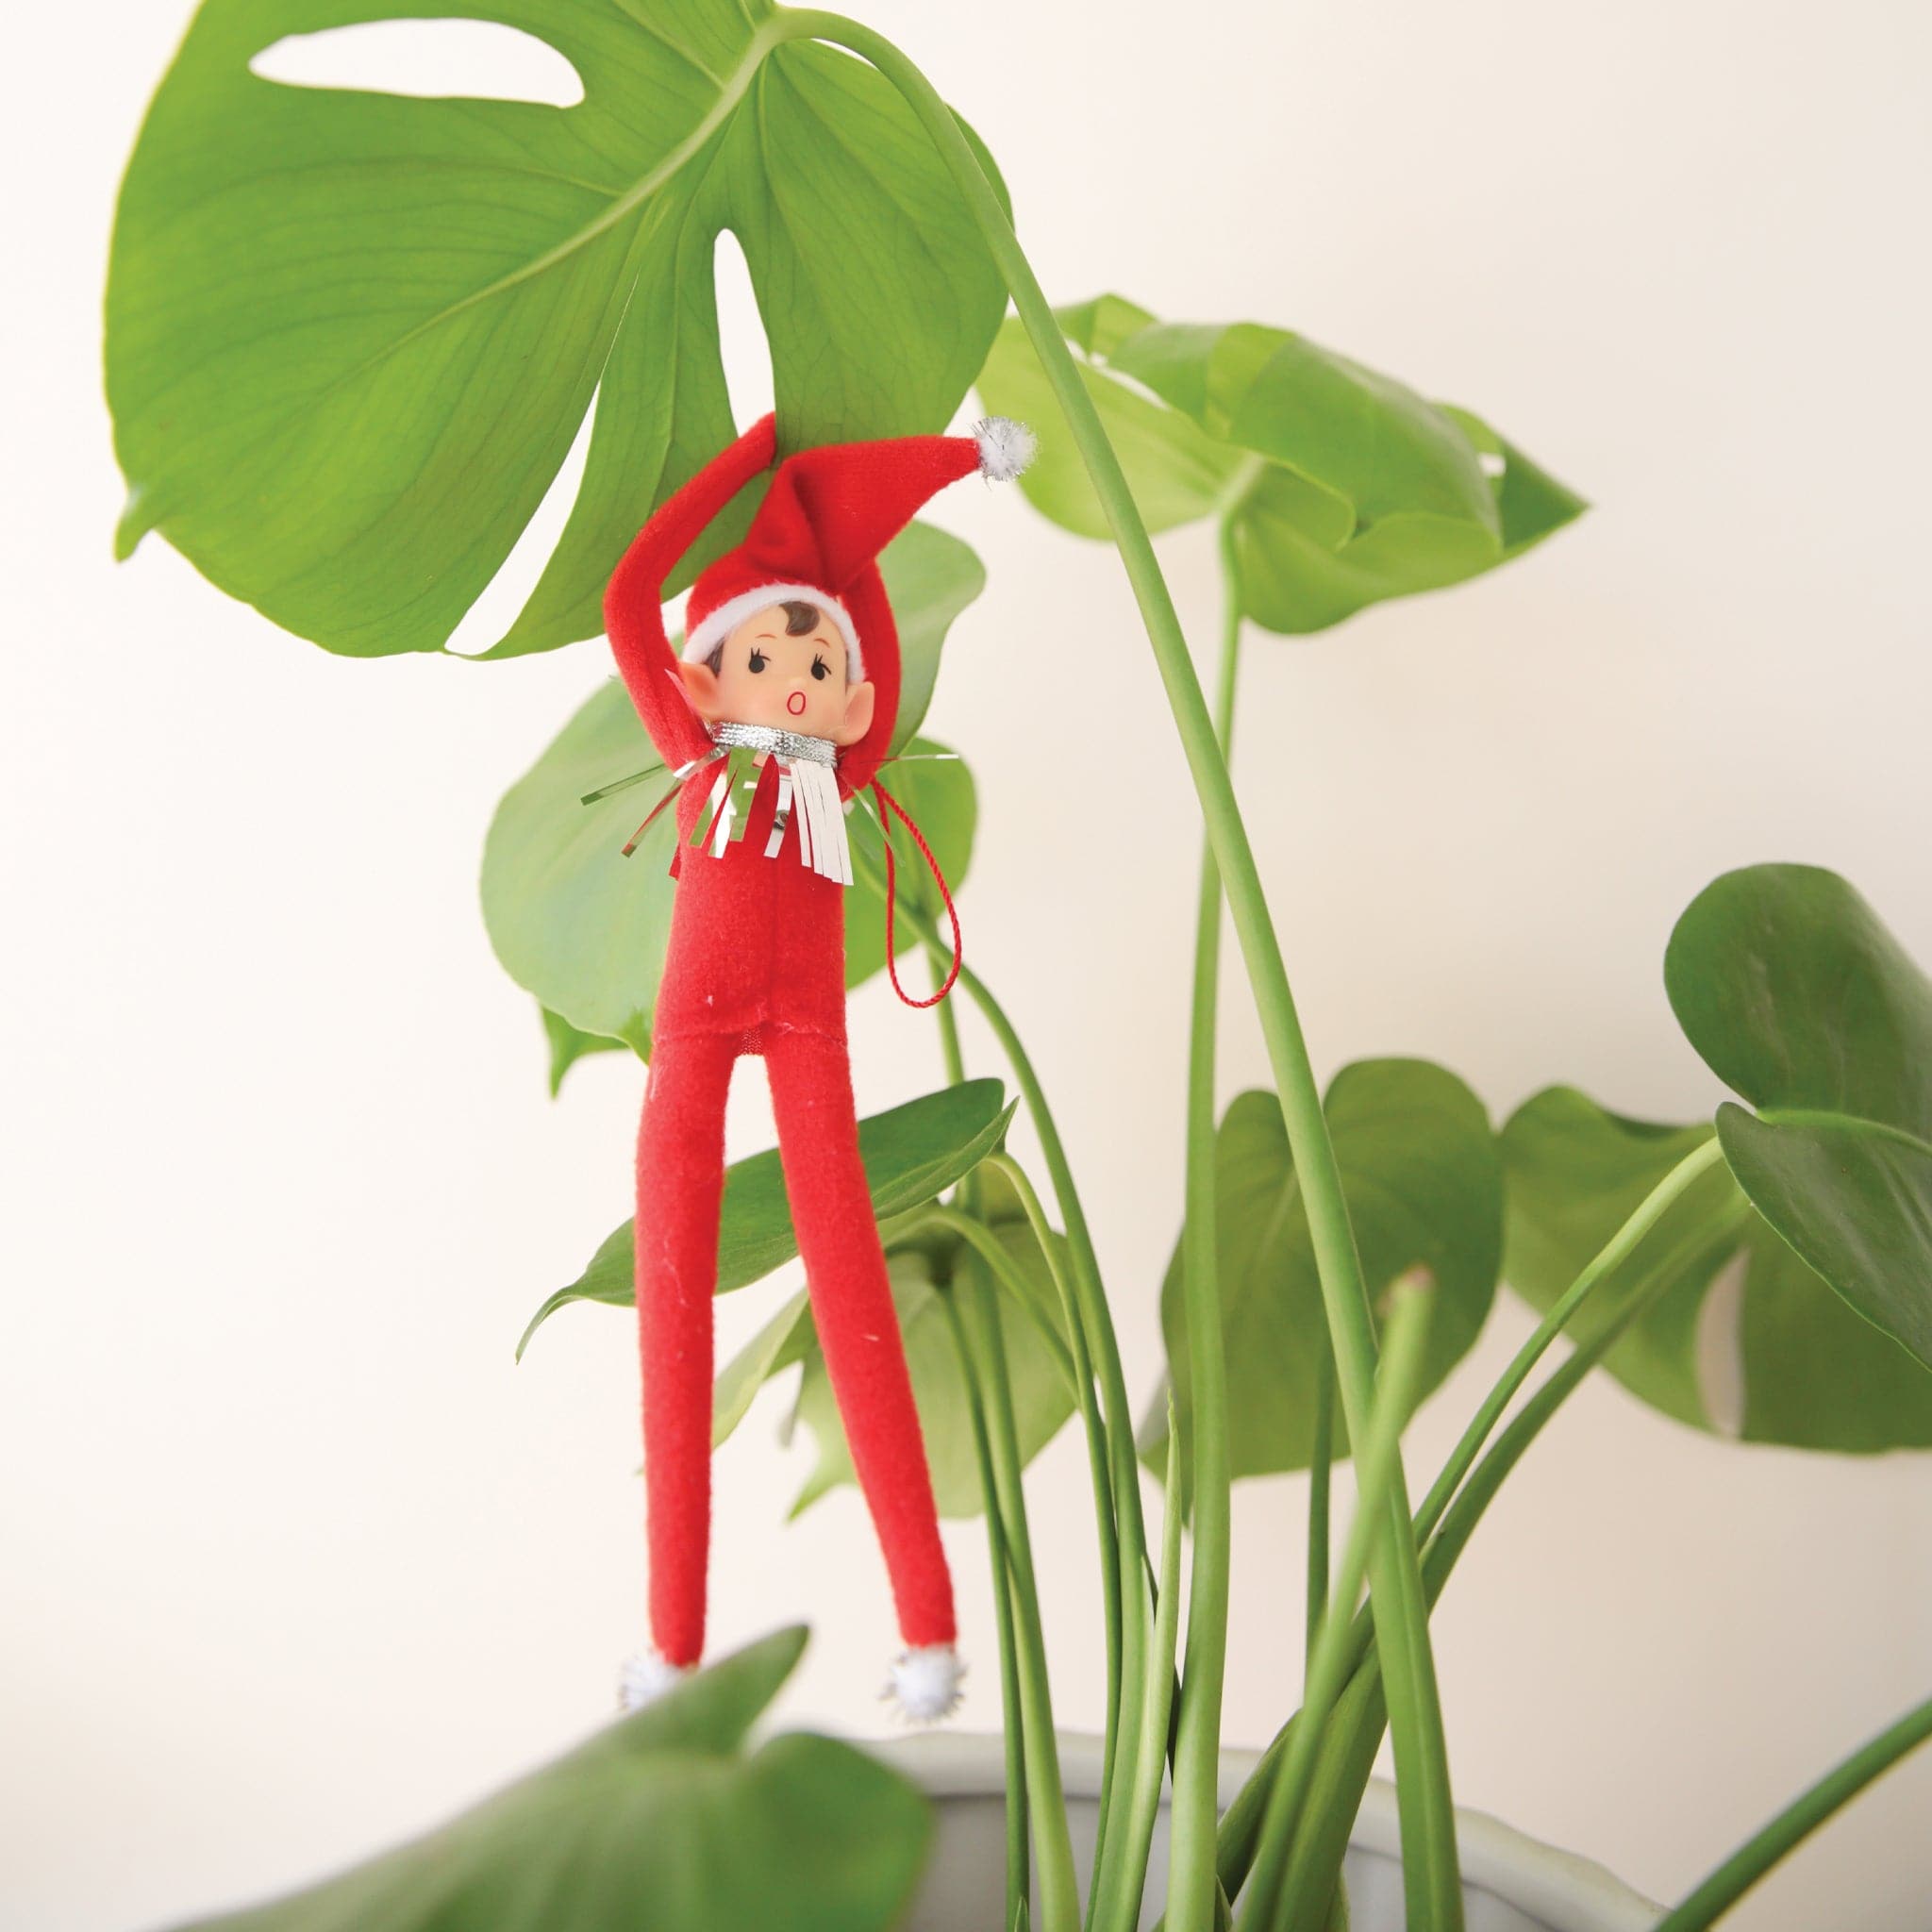 On a cream background is a red elf ornament with bendy arms and legs and a green loop for hanging and is photographed here wrapped around a green house plant.